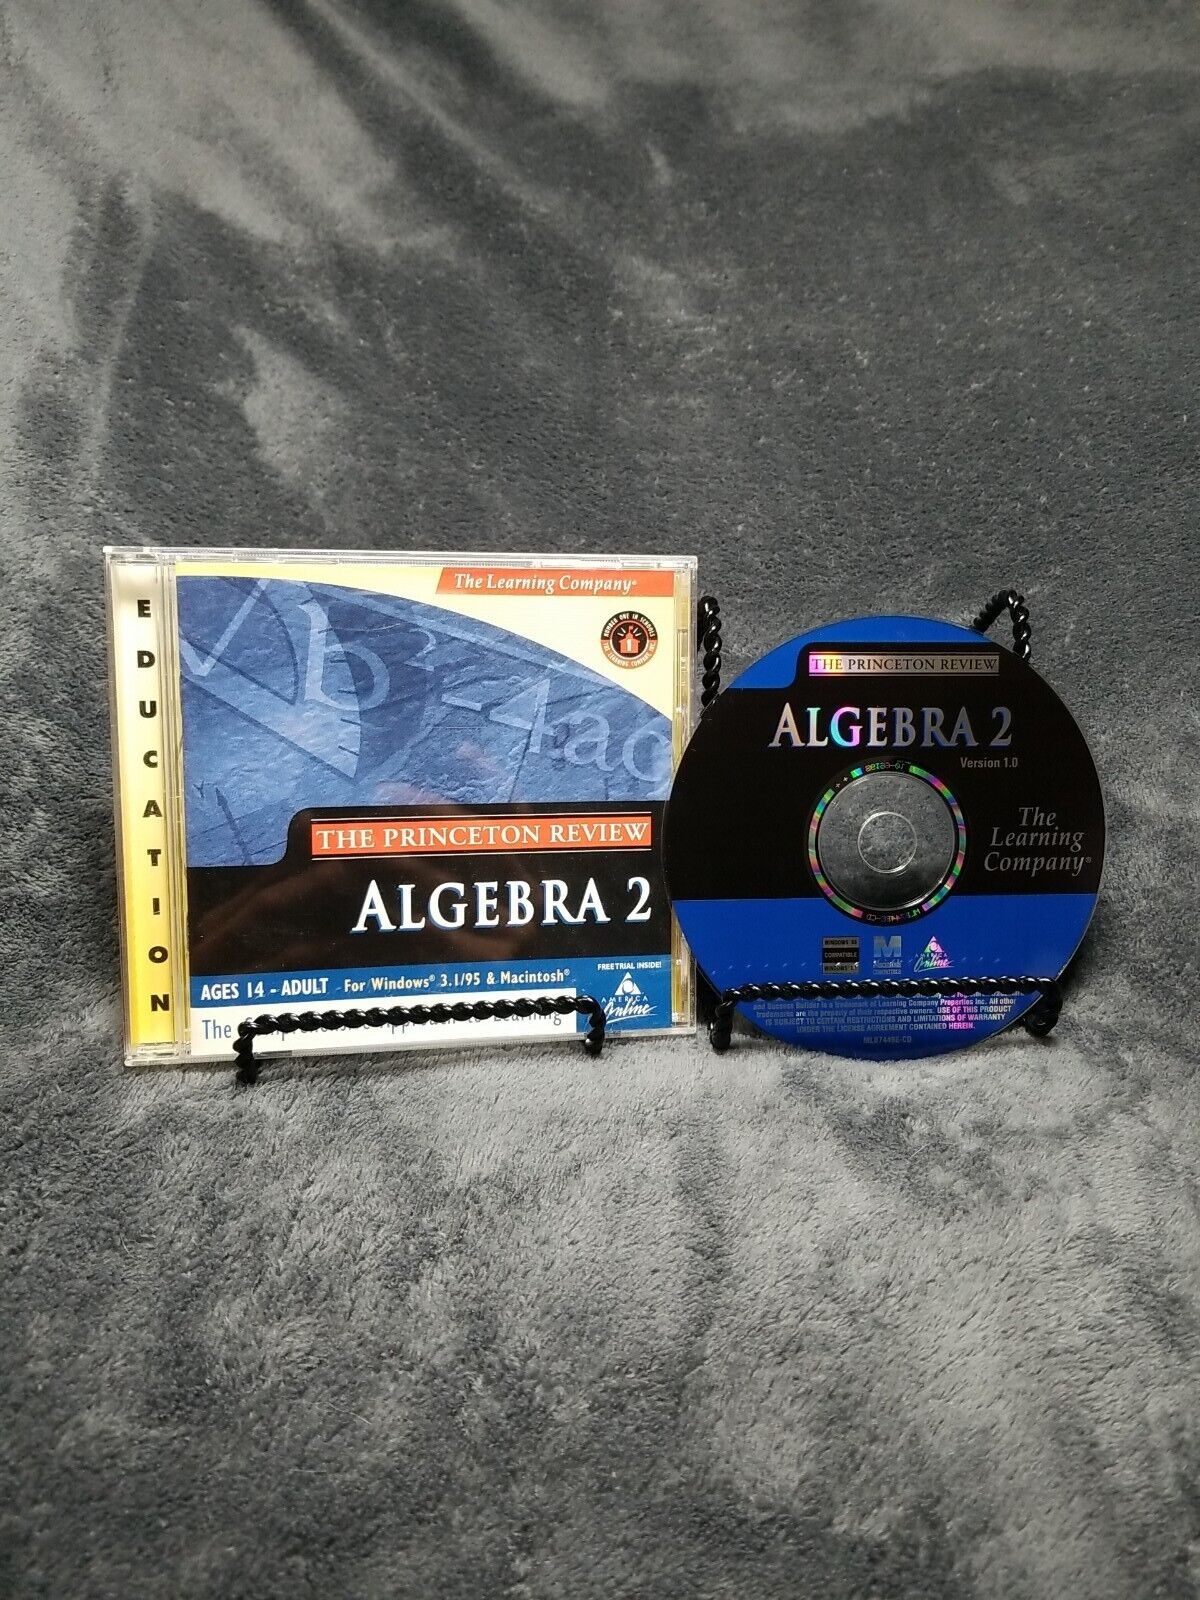 The Princeton Review Algebra 2 (PC/Mac) The Learning Company